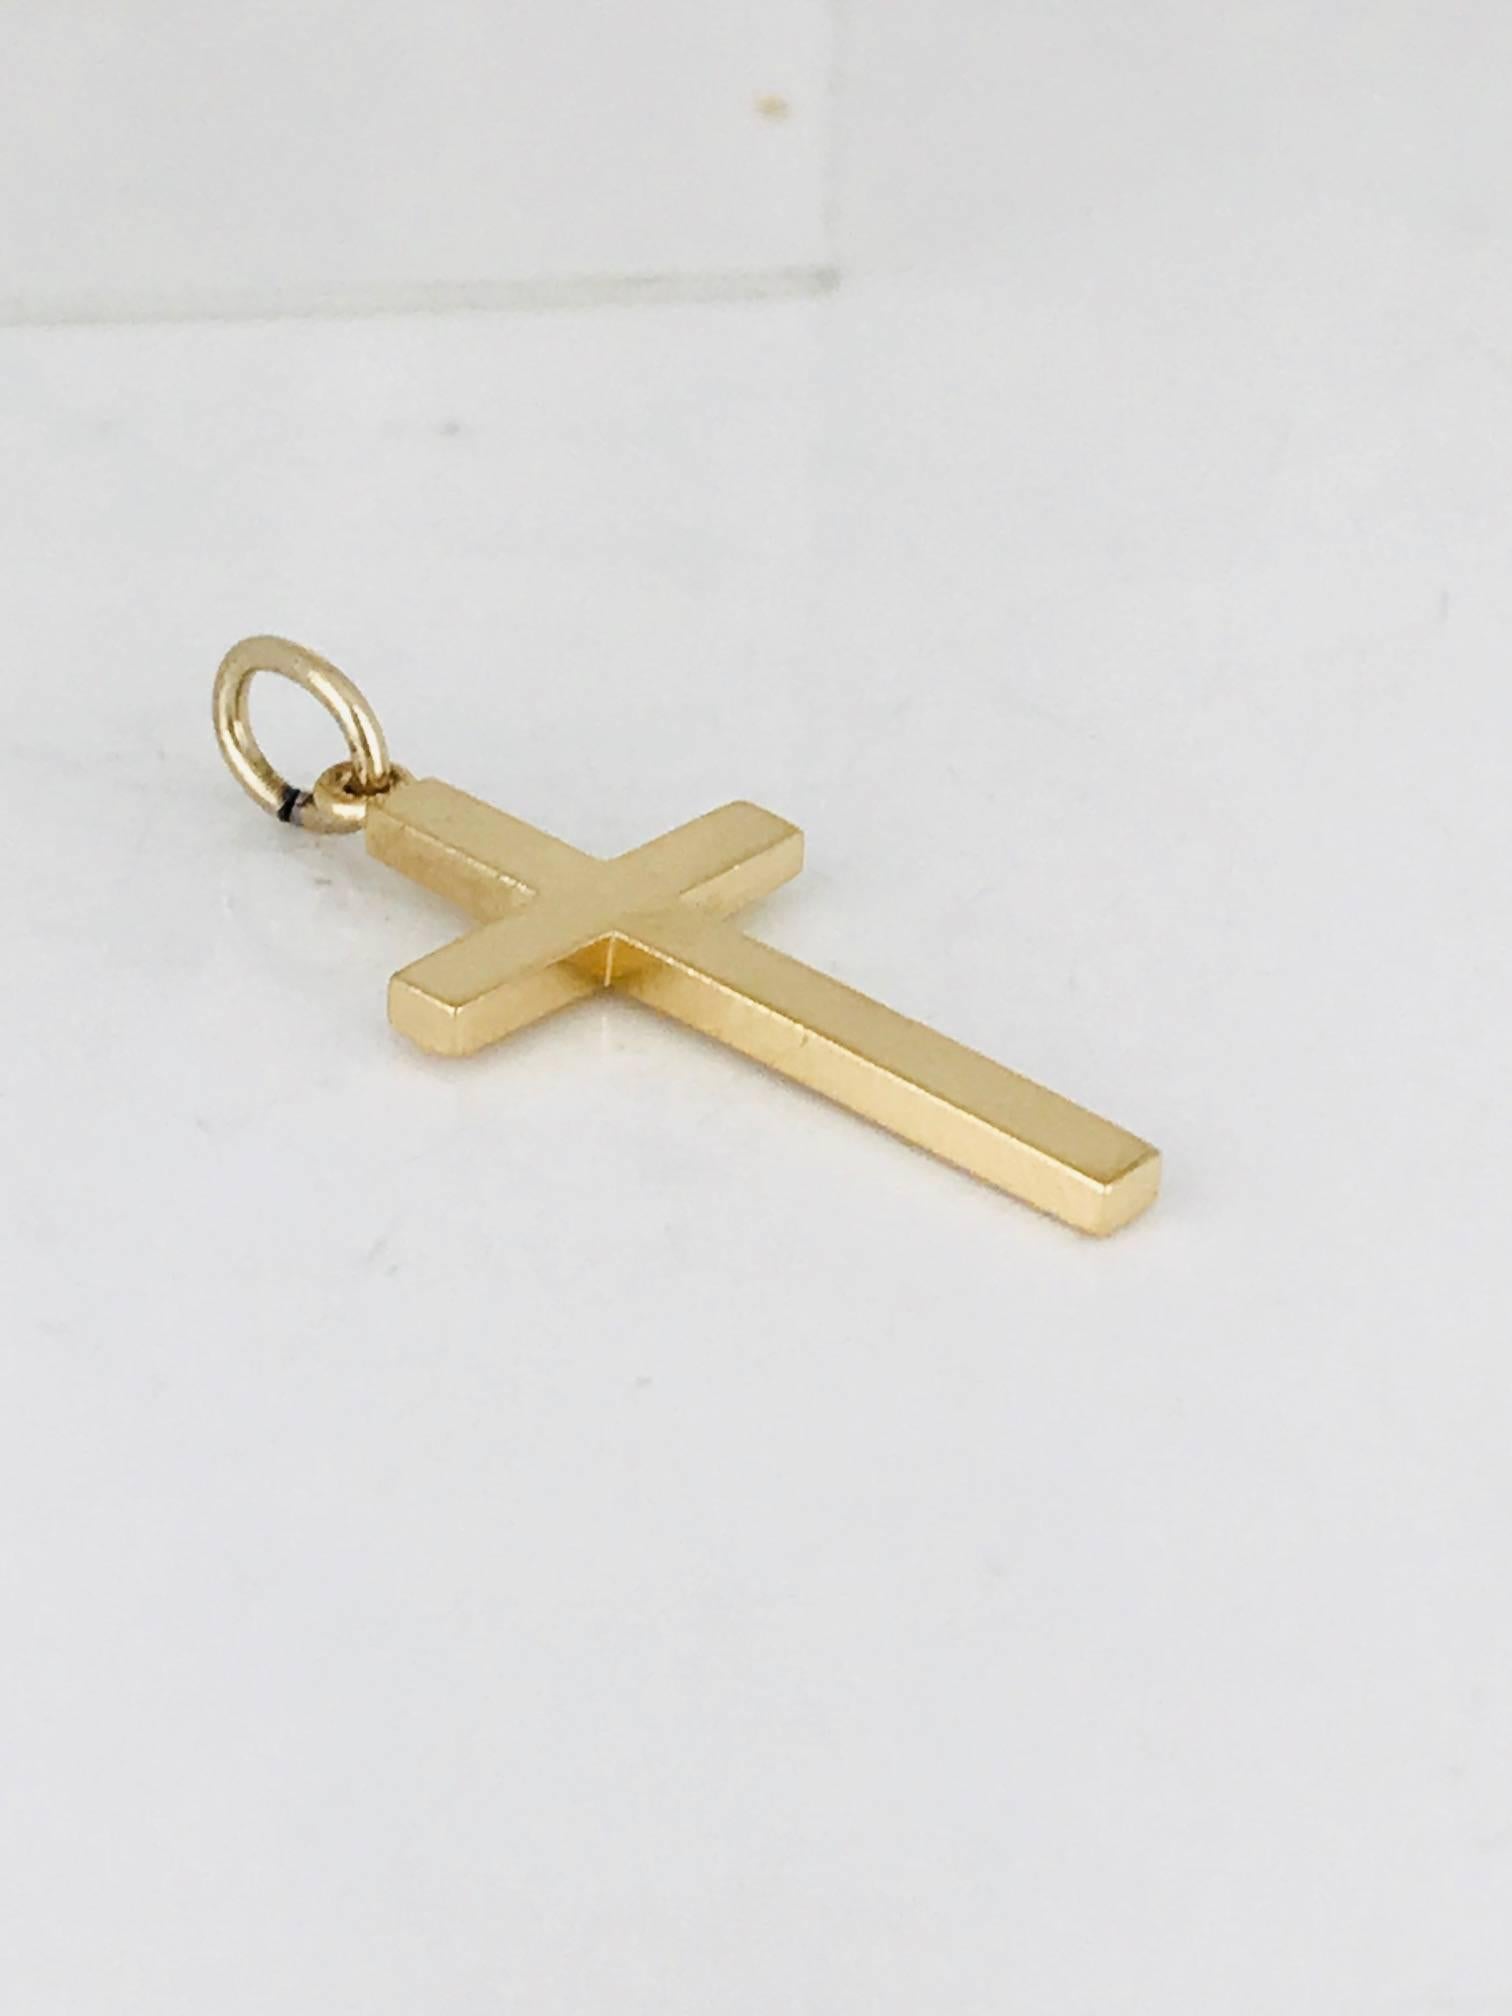 14 karat yellow gold, Tiffany & Co. Cross.
Circa 1970
Signed, Tiffany & Co, 14 kt

GIA Gemologist inspected & evaluated